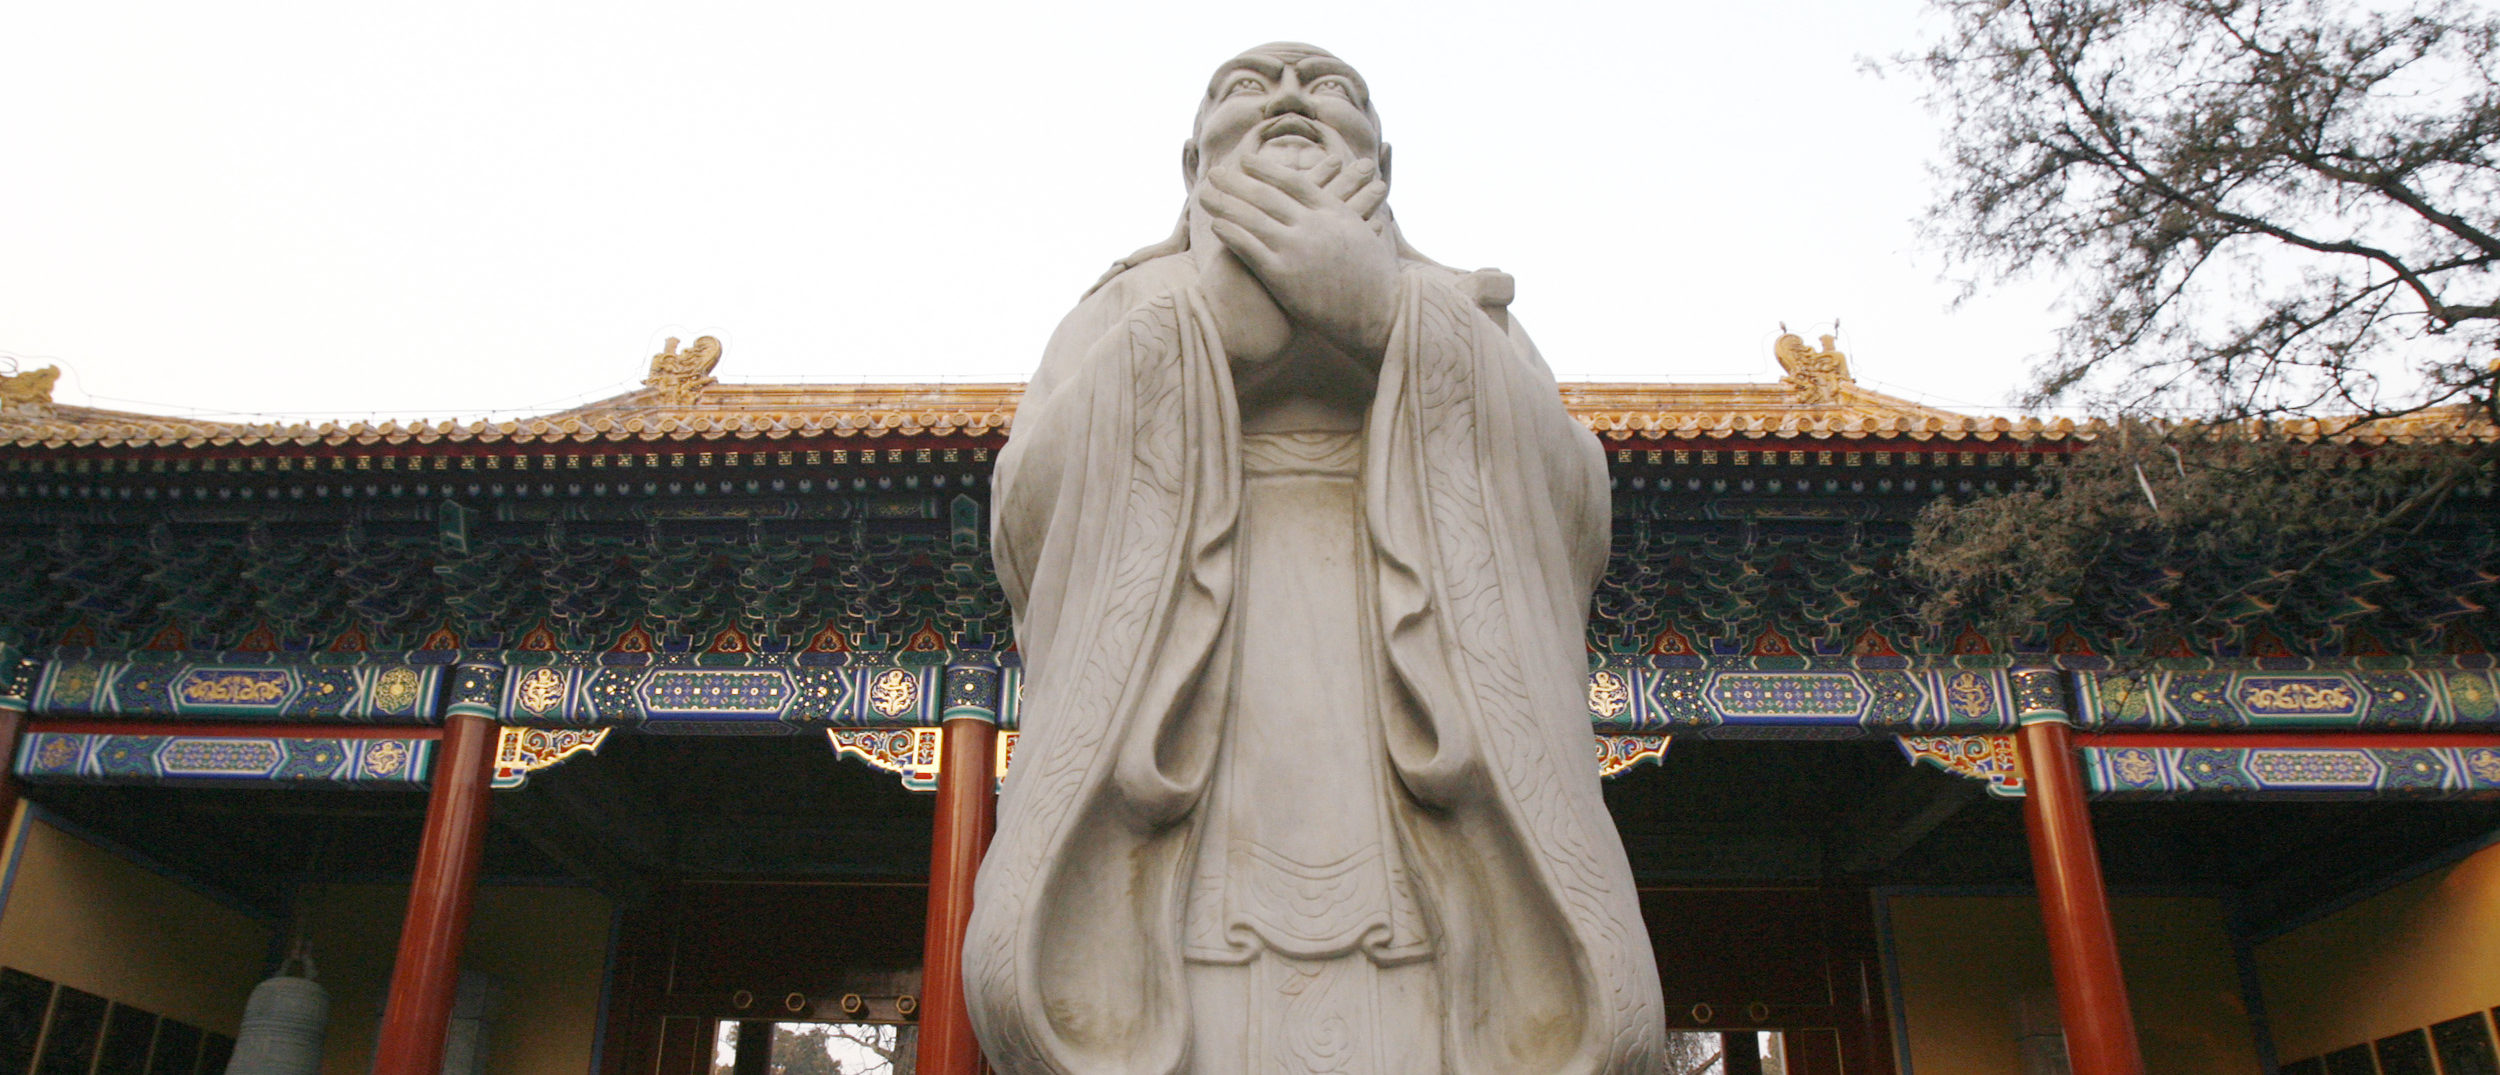 A tour guide speaks beside a statue of Confucius at the Confucian Temple in Beijing December 5, 2007. The Confucian Temple, which is being restored, was first built in Yuan Dynasty of the 14th century and was completed in 1306. The temple was a place where emperors offered national sacrifices to Confucius in the Yuan, Ming, and Qing dynasty. The Ancient Confucian Temple was part of the Guozijian or Imperial College. (REUTERS/Claro Cortes)